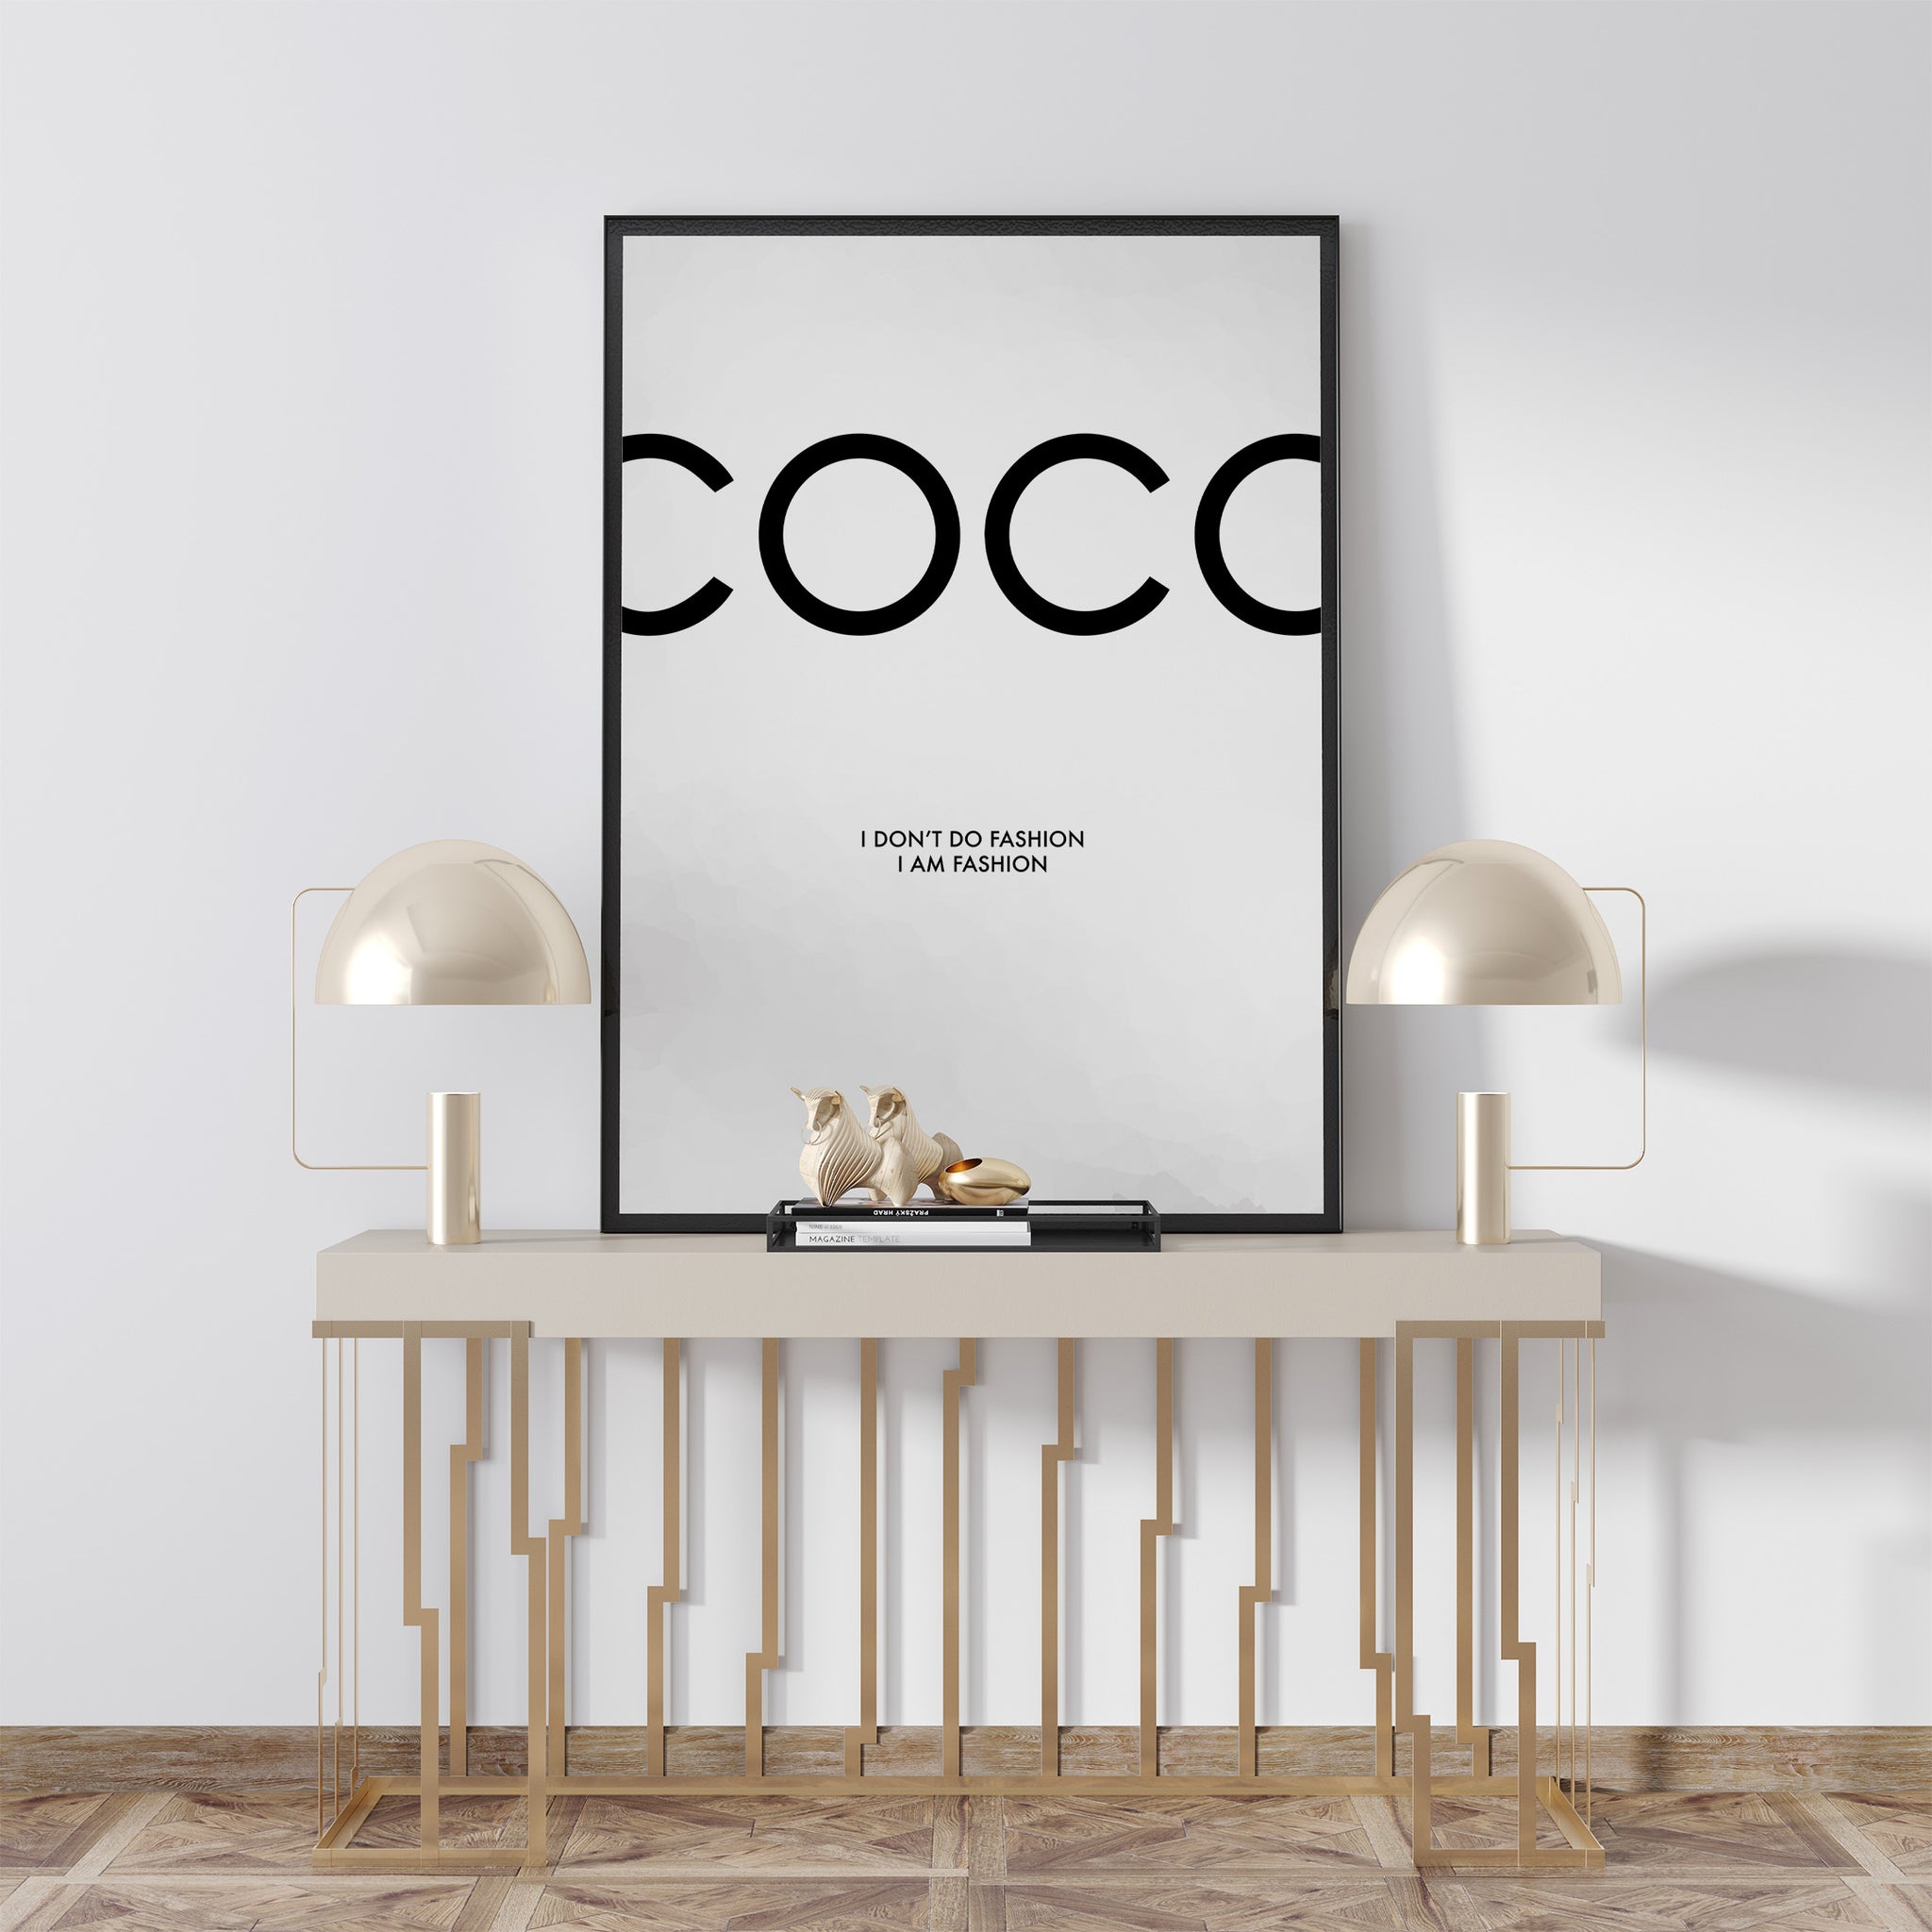 Coco Chanel Poster - Quote & typography posters